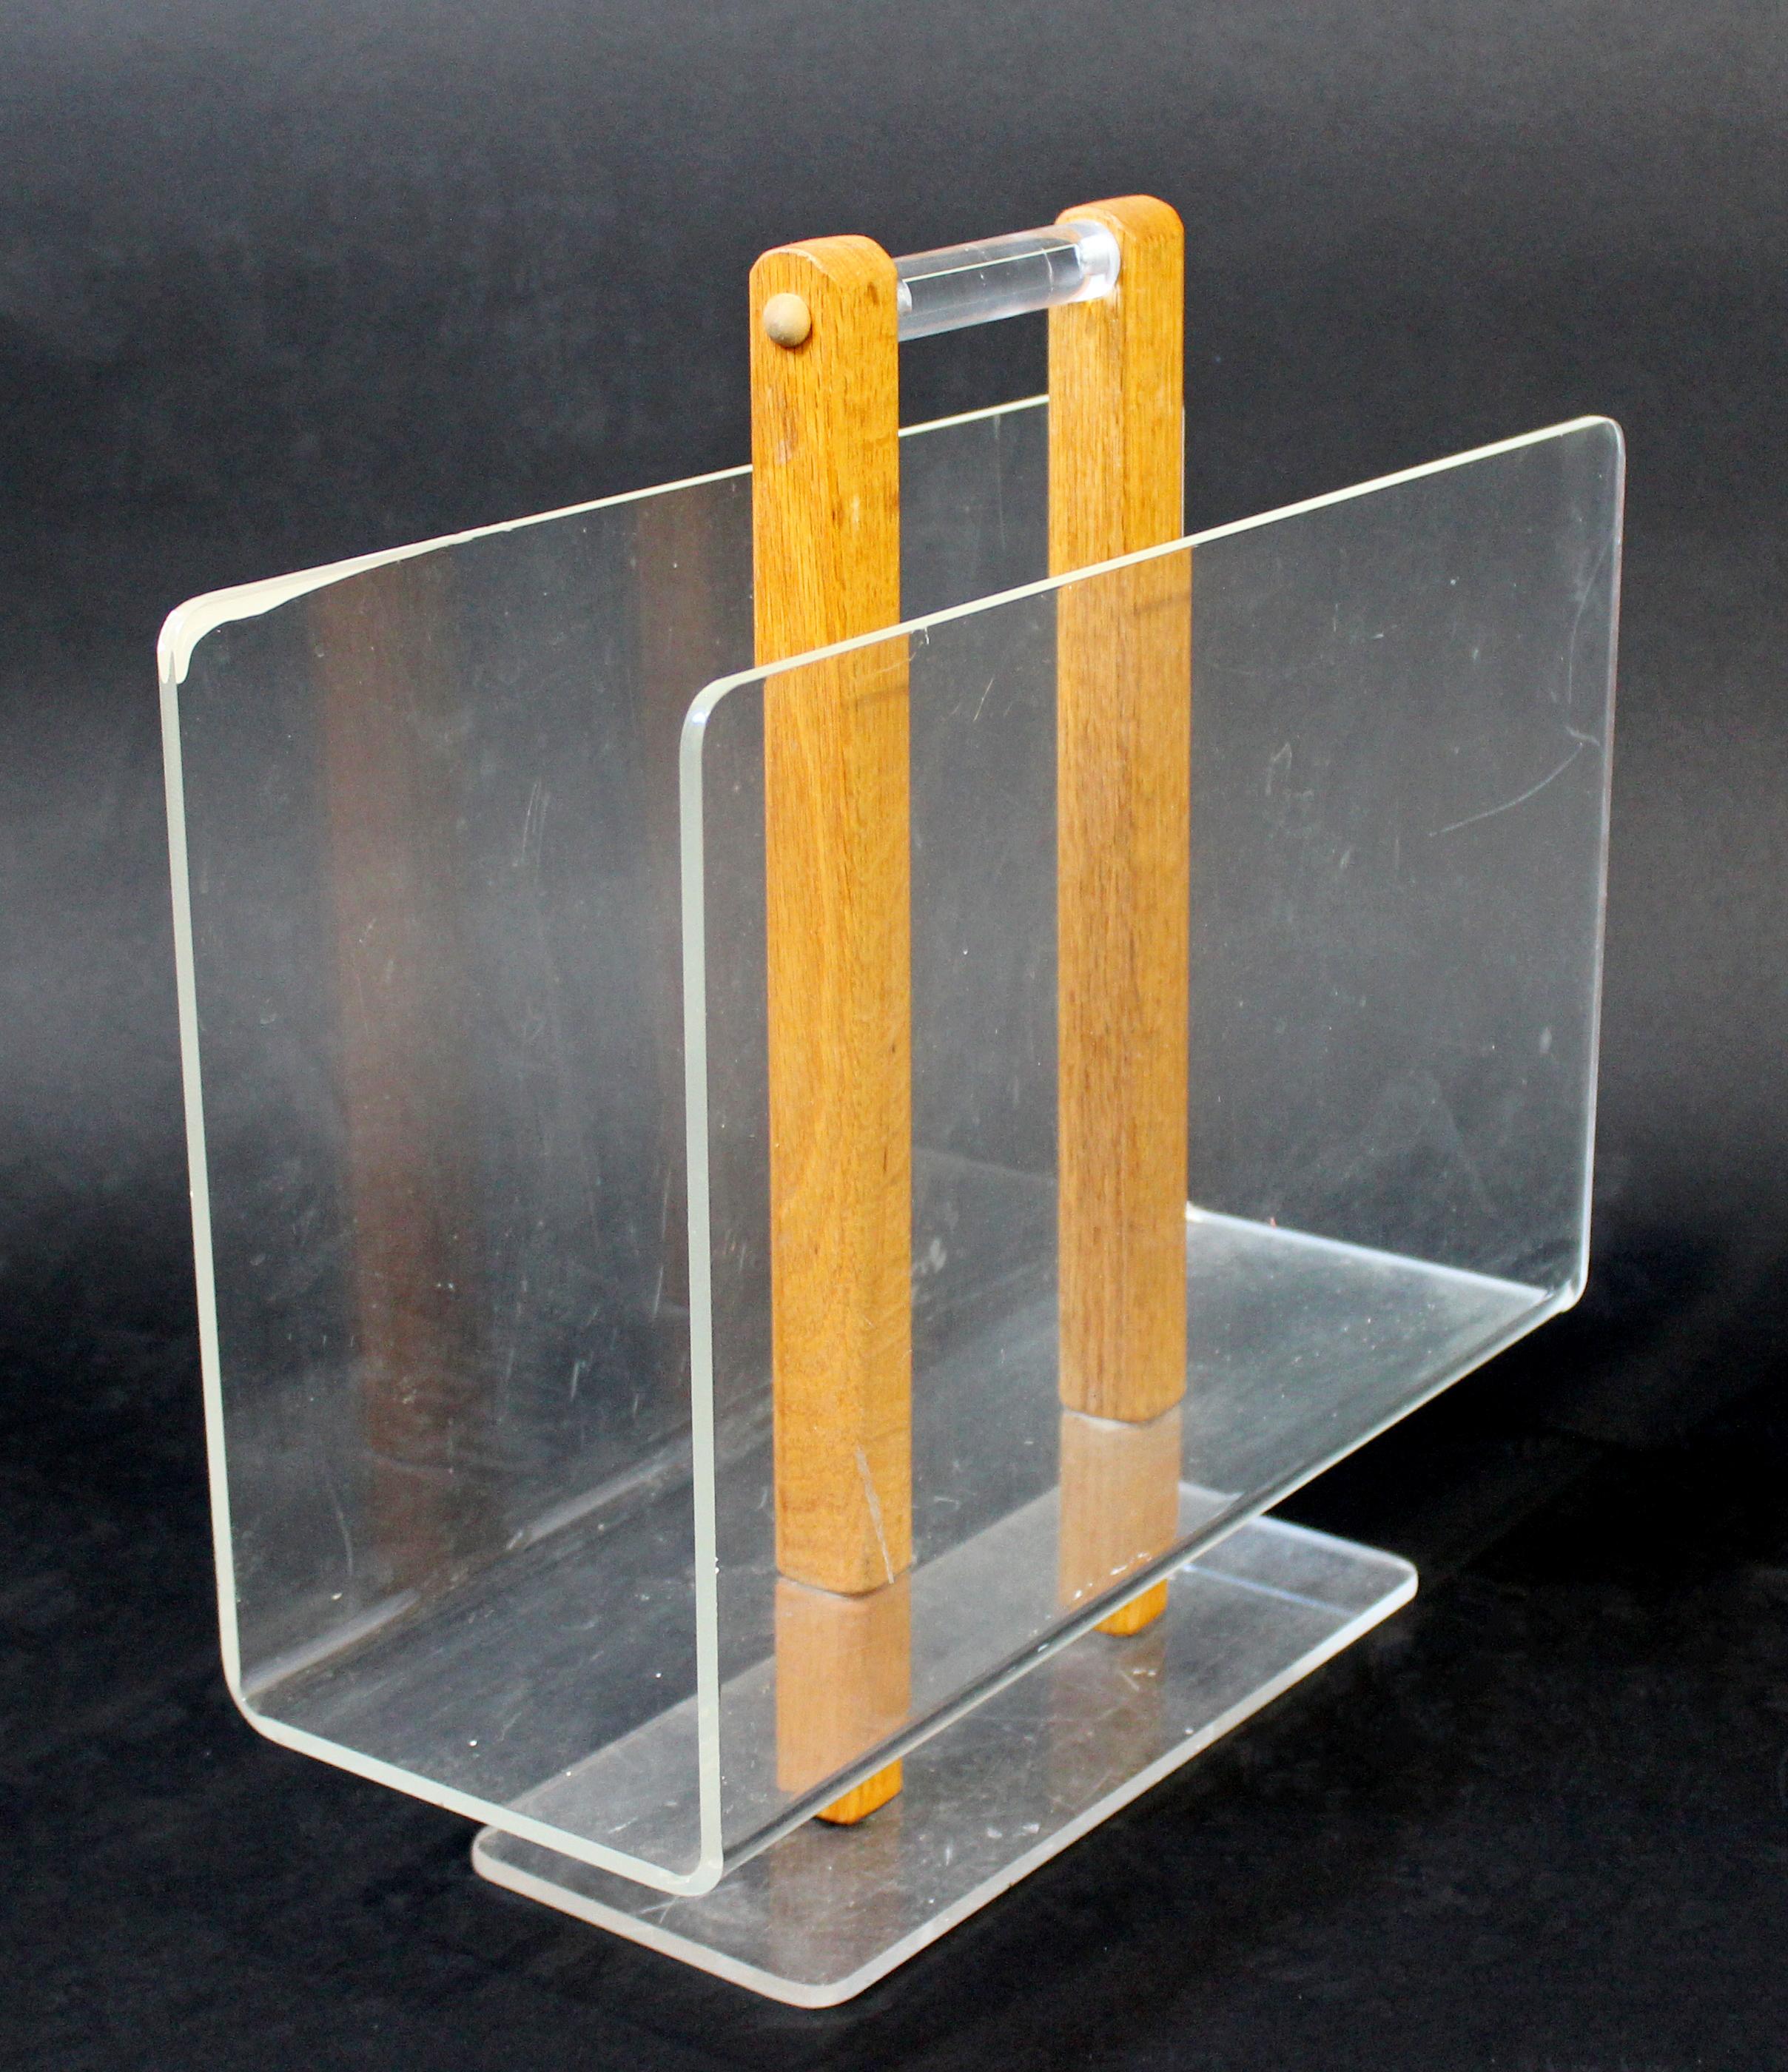 For your consideration is a delightful, dual sided, oak wood and Lucite magazine rack, by Grosfeld House, circa 1970s. In very good vintage condition. The dimensions are 16